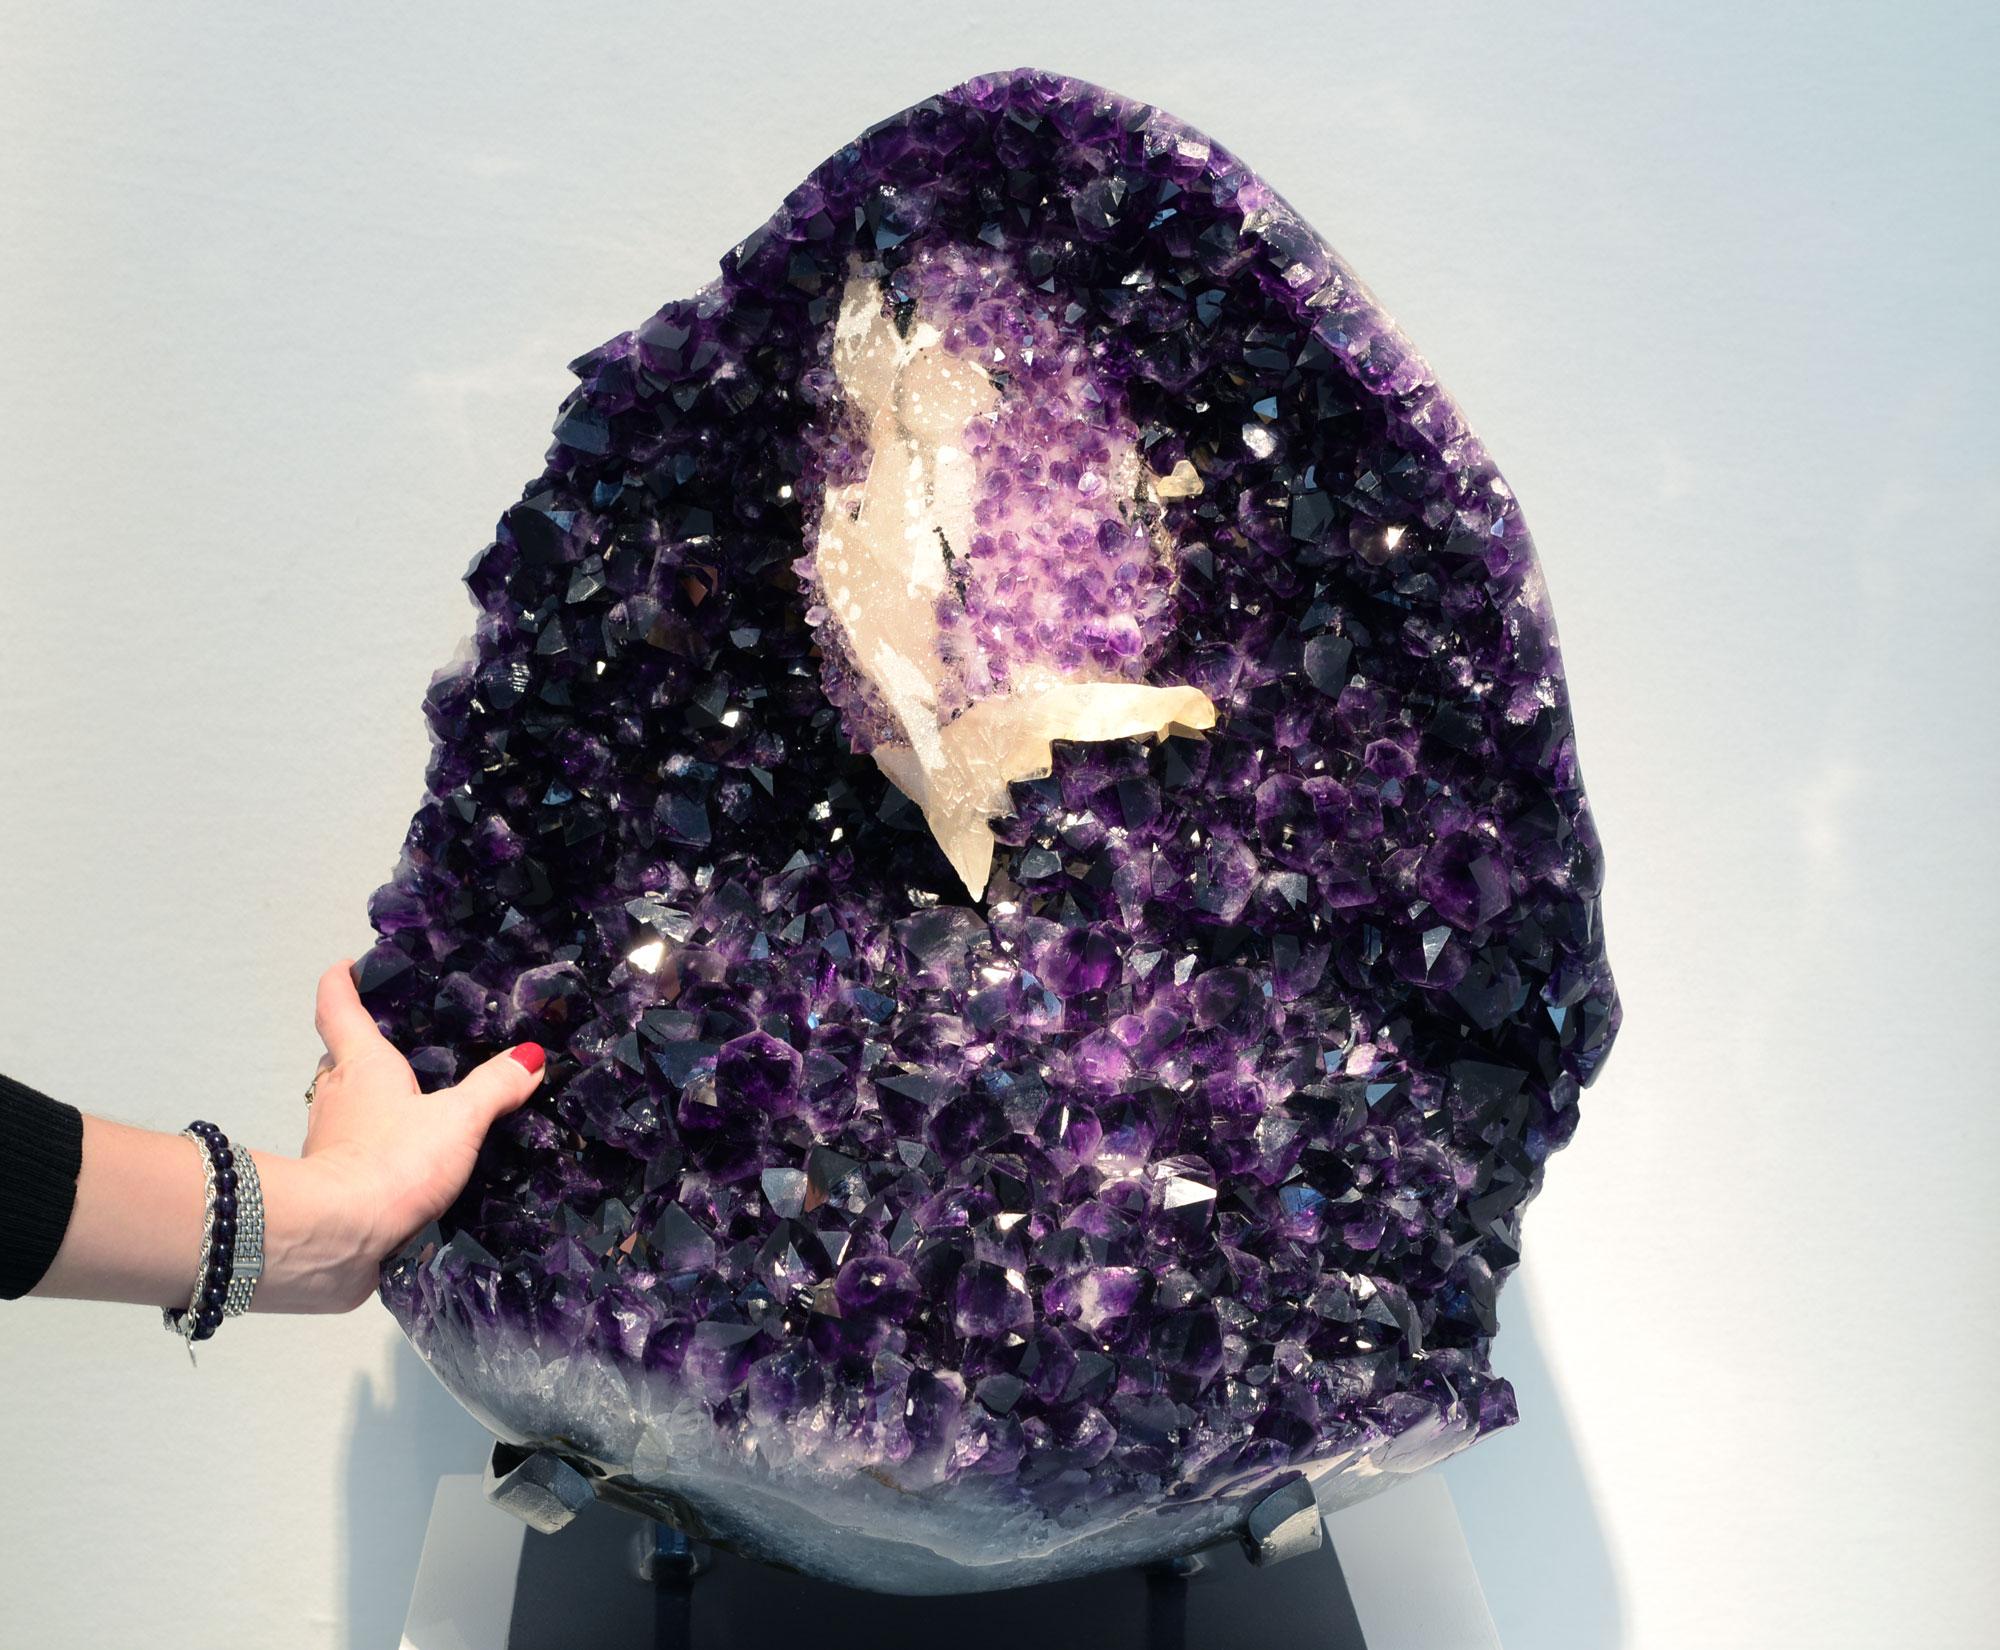 A breath-taking large Uruguayan amethyst cluster with large, amethyst-overlaid calcite formation at the top.

This formation is unusual for its overall scale and the extremely high quality of its intense violet amethyst crystals. Furthermore, the